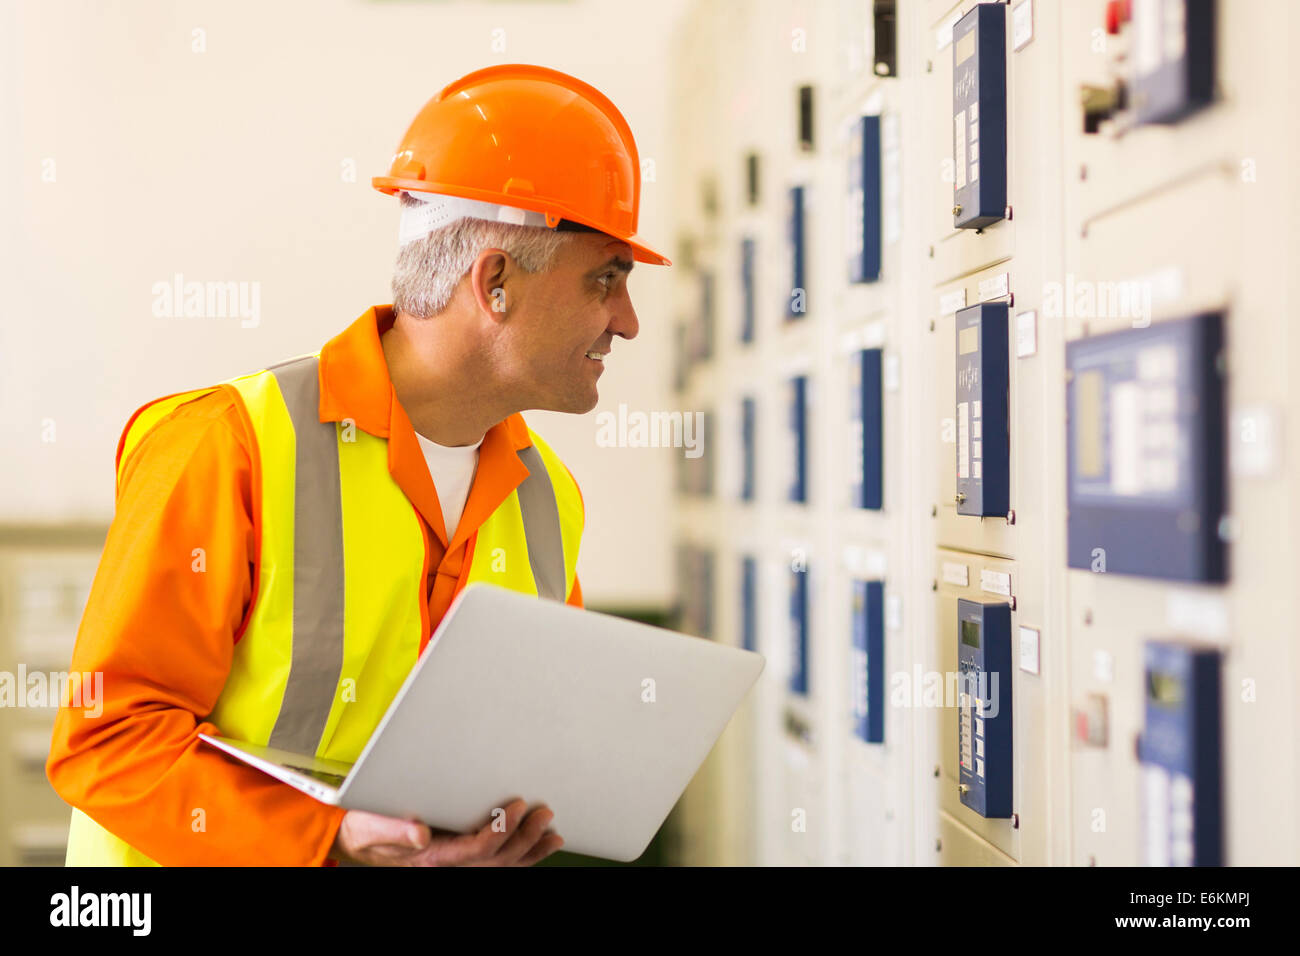 middle aged industrial electrician working in power plant control room Stock Photo